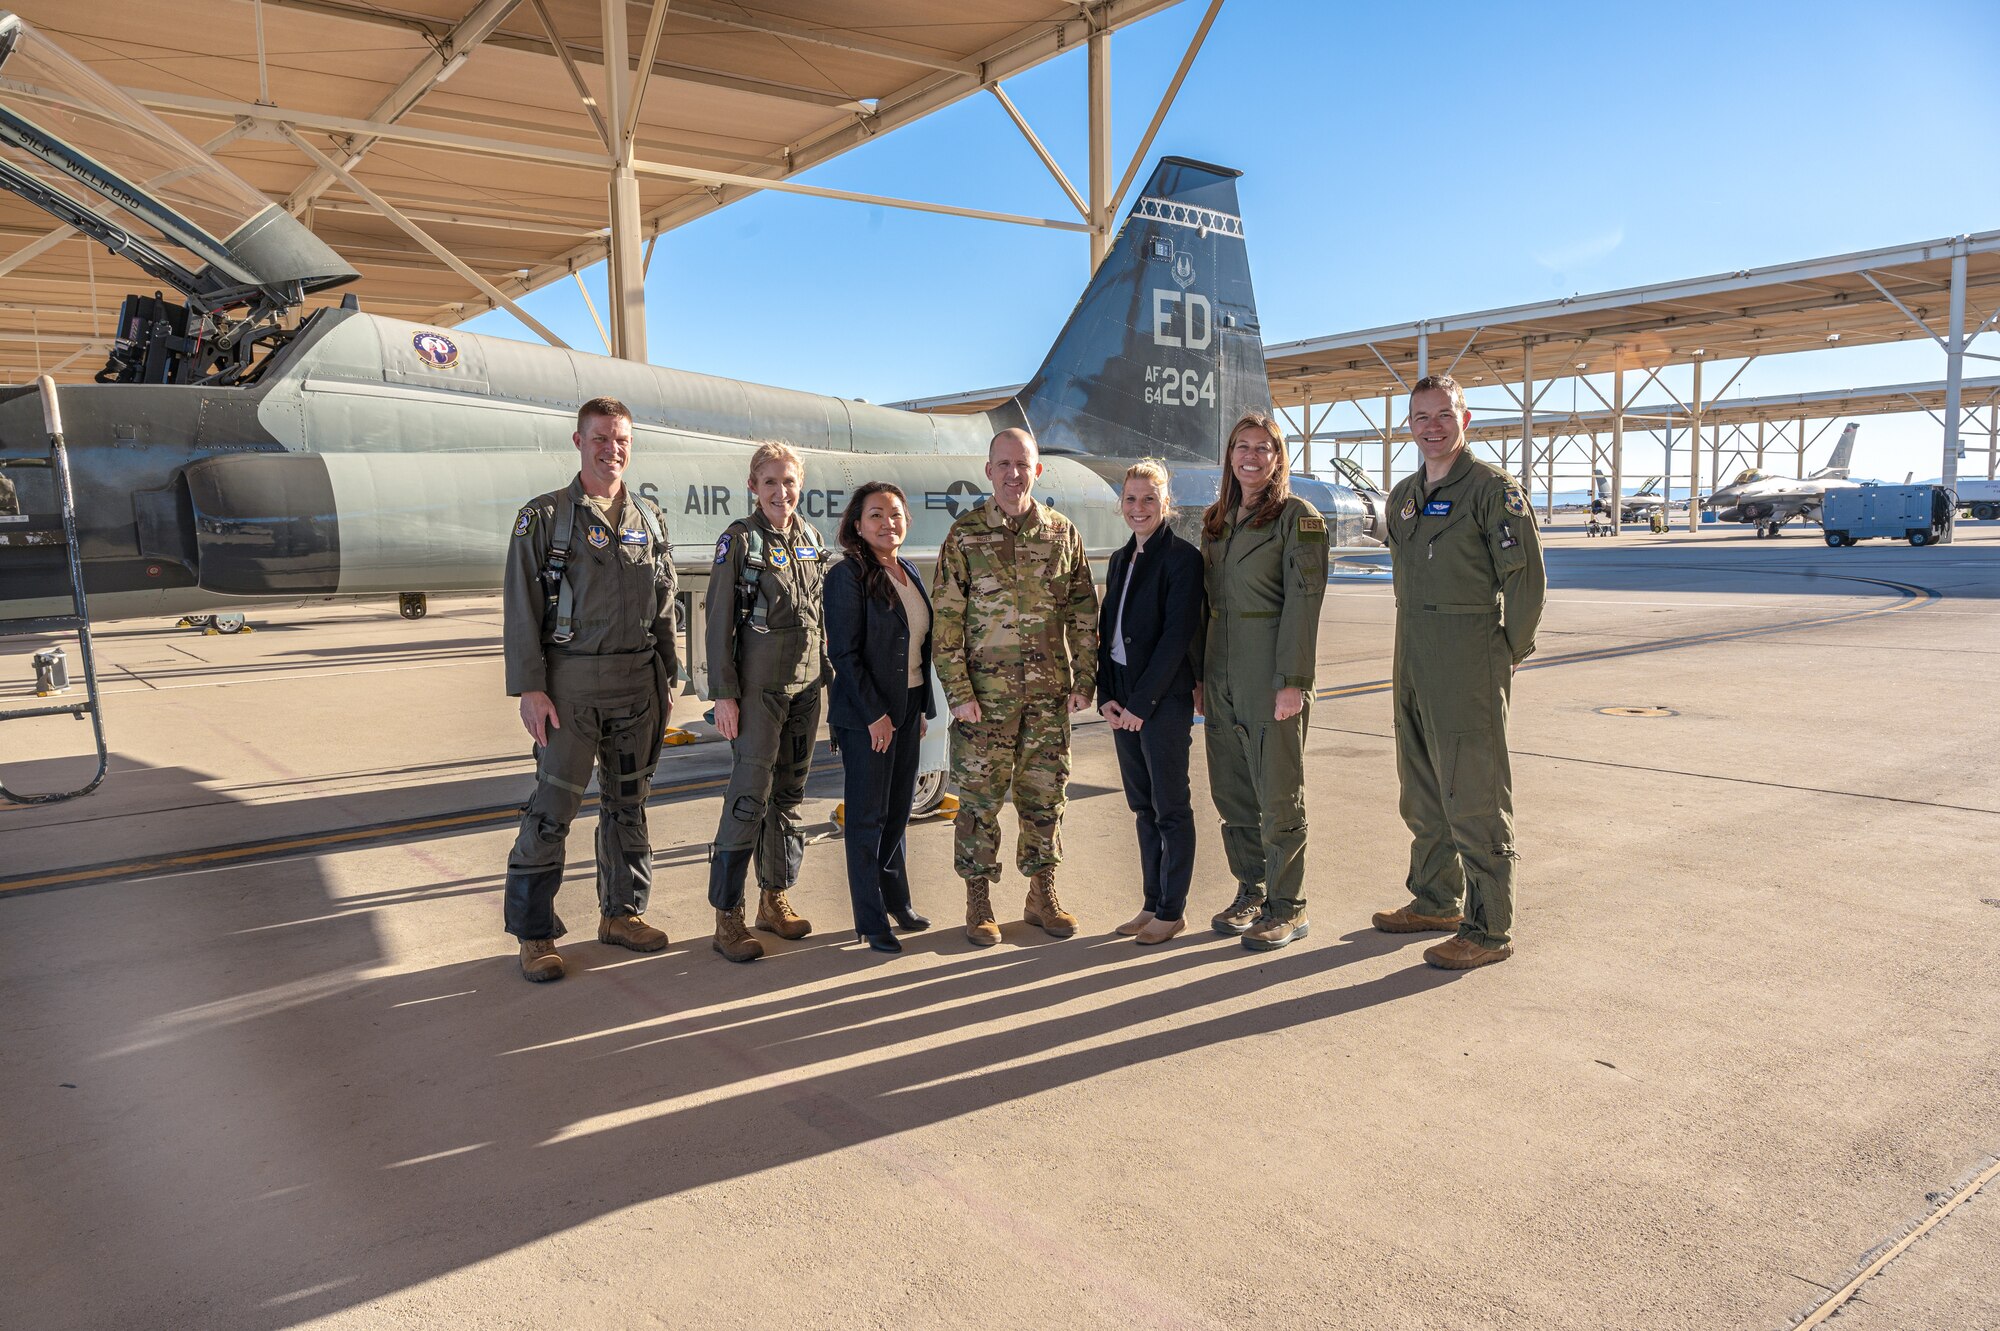 Group photo of Lt. Col. Joshua Egan, 412th Test Wing Chief of Safety, Maj. Gen. Jeannie Leavitt, Department of the Air Force Chief of Safety, MyNga Day, 412th Test Wing Protocol Chief, Brig. Gen. Matthew Higer, 412th Test Wing Commander, Alicia Helton, 412th Test Wing Protocol Specialist, Laura Macaluso, Director, Department of Defense Force Safety and Occupational Health, and Maj. Philip Downing, 370th Flight Test Squadron, F-16 Test Pilot